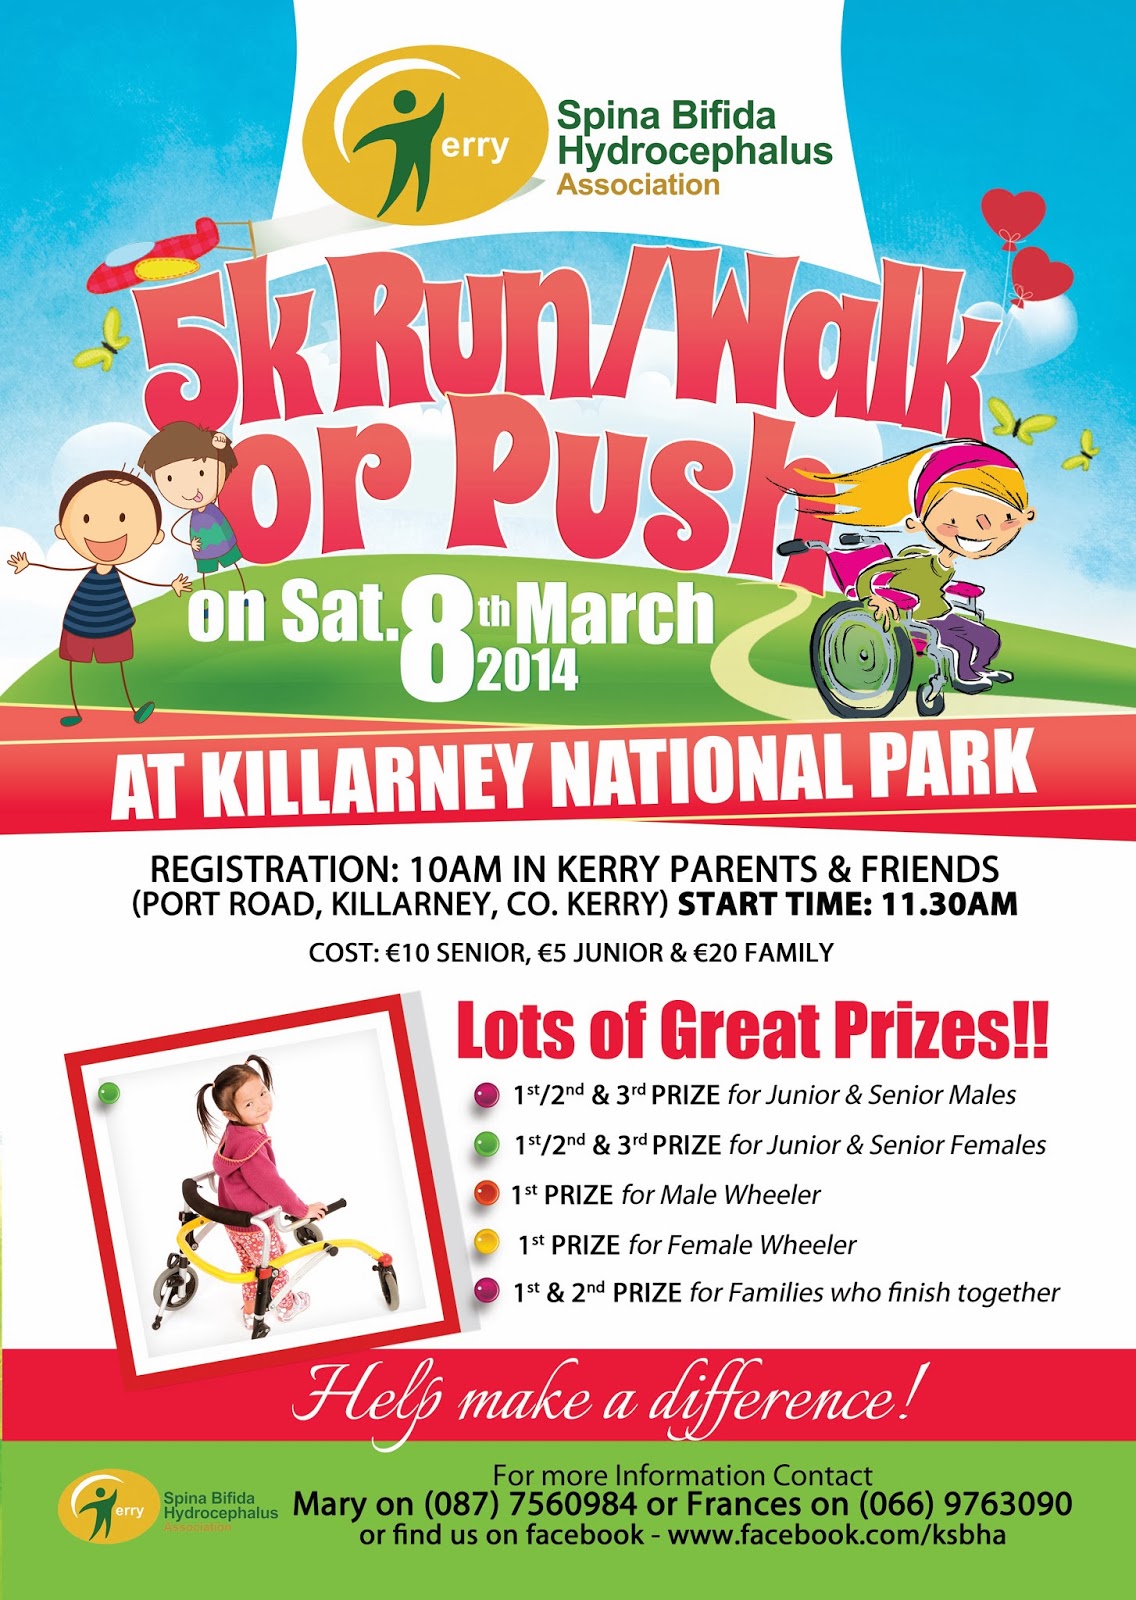 St.Brendan's Athletics Club: Road races in KERRY, March 2014